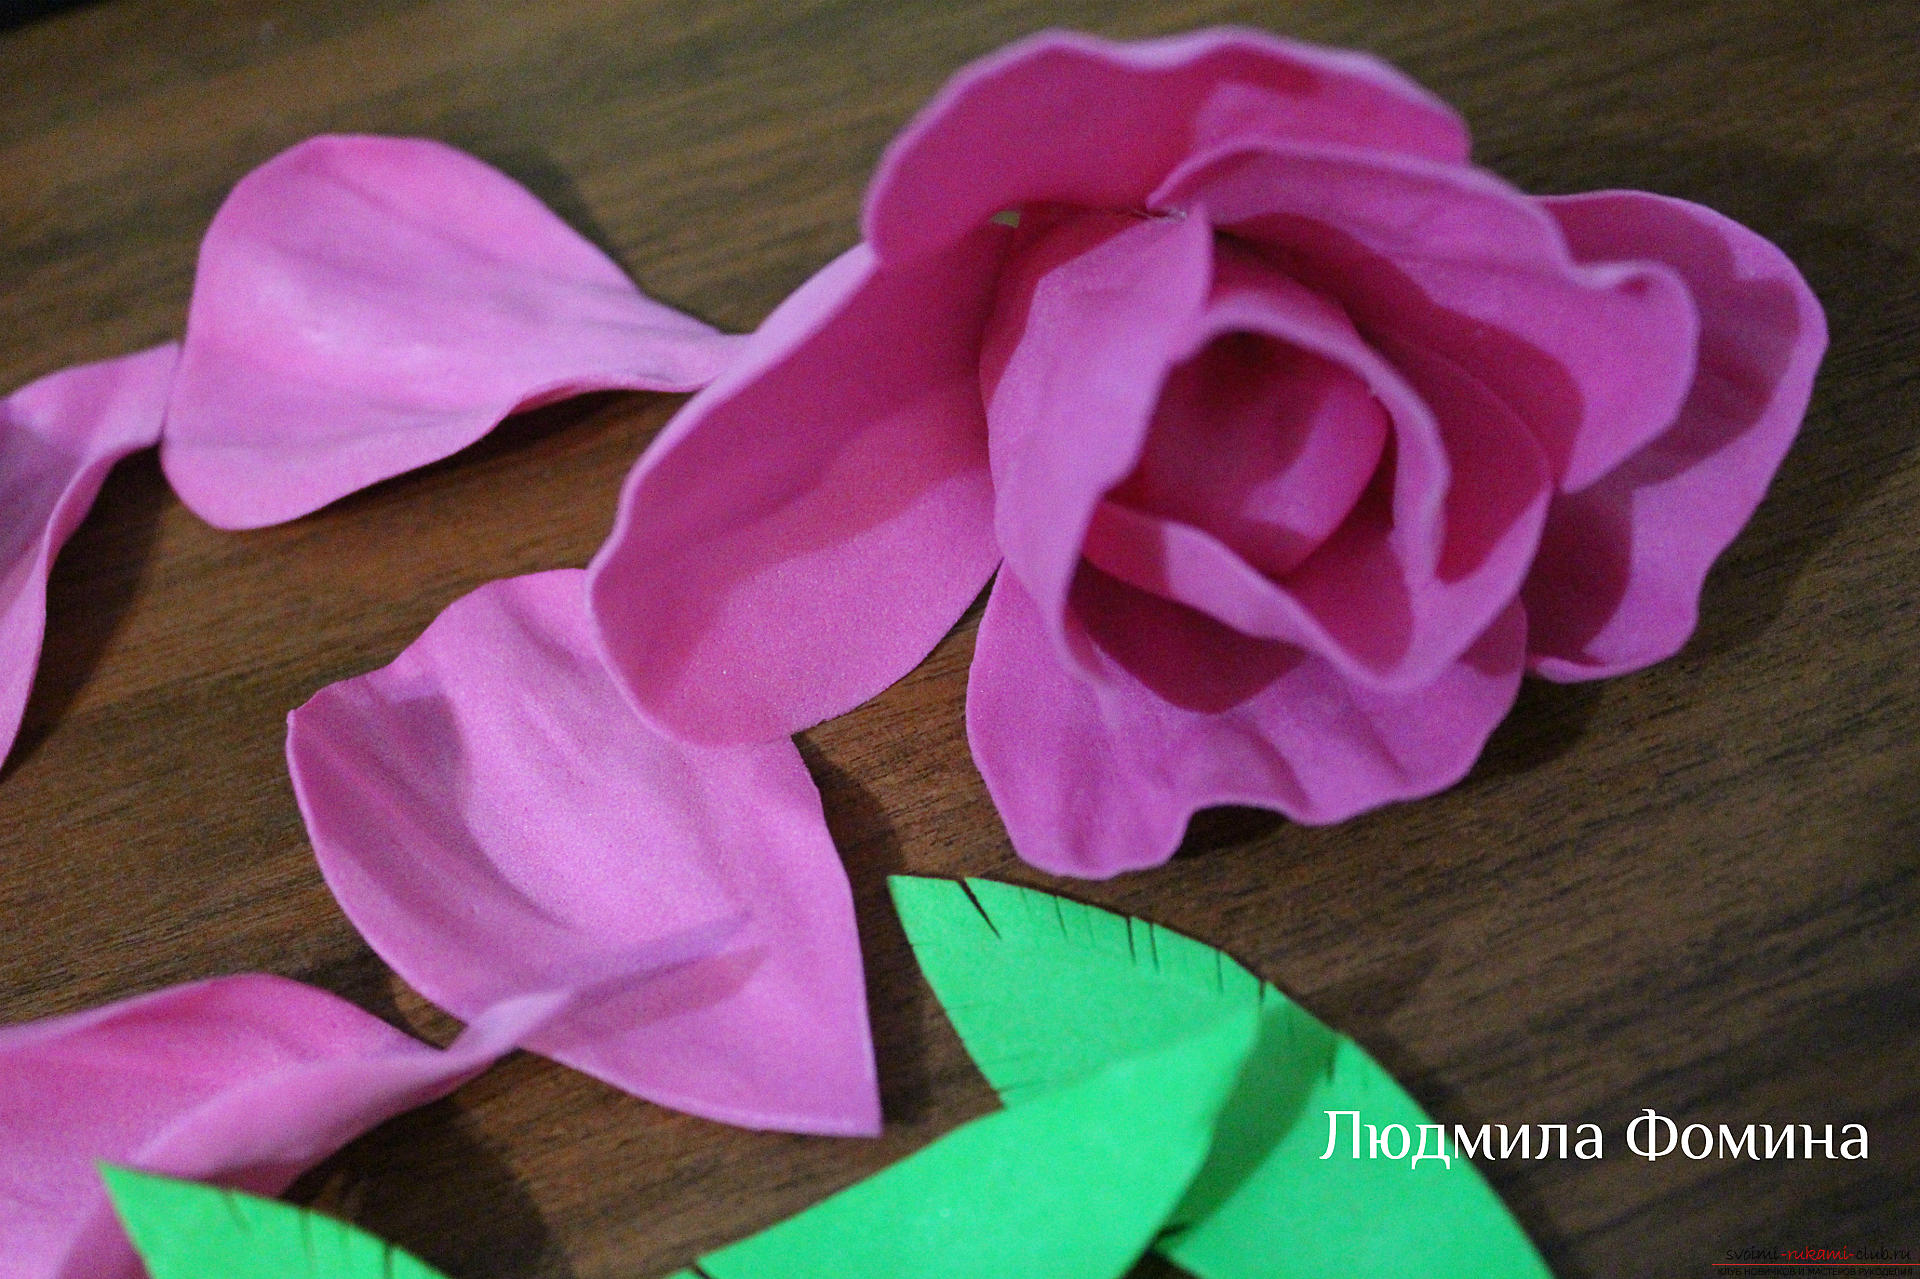 A master class on the creation of colors will teach you how to make a rose or fake skin from your hands. Photo Number 9